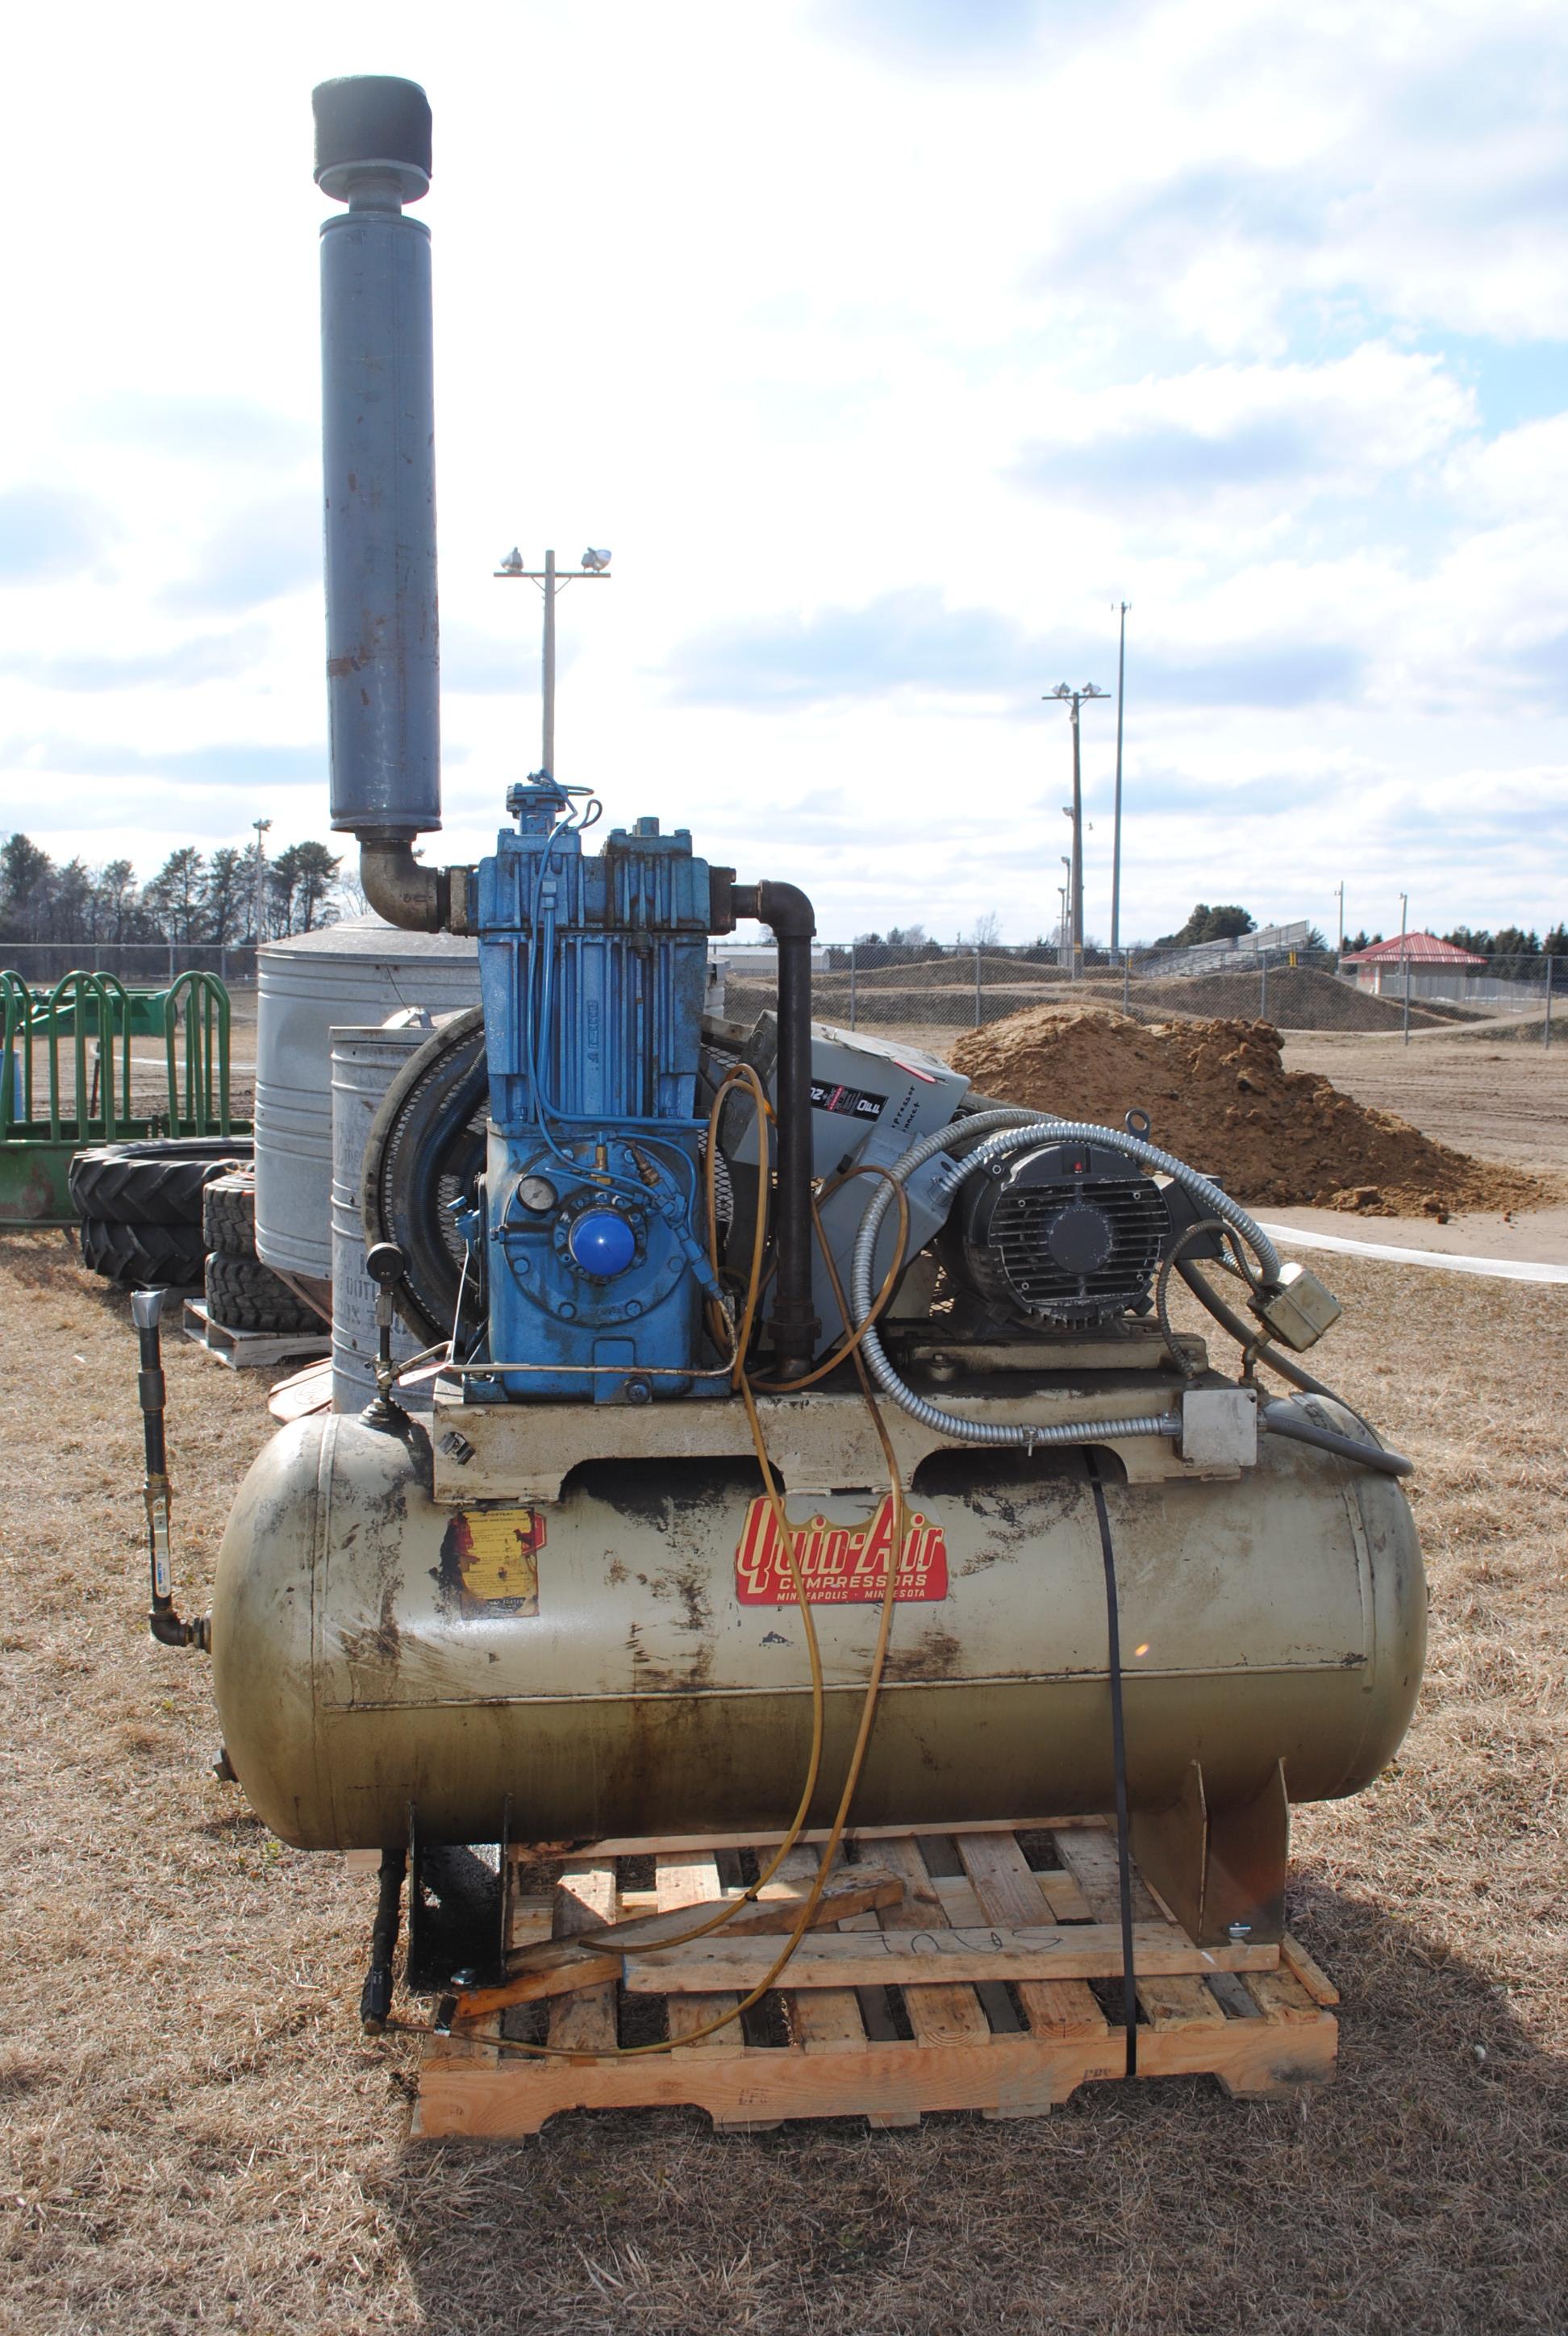 Quin Air Compressors 3-phase, 15 HP Quincy Model 390 compressor, works, replaced by newer machine